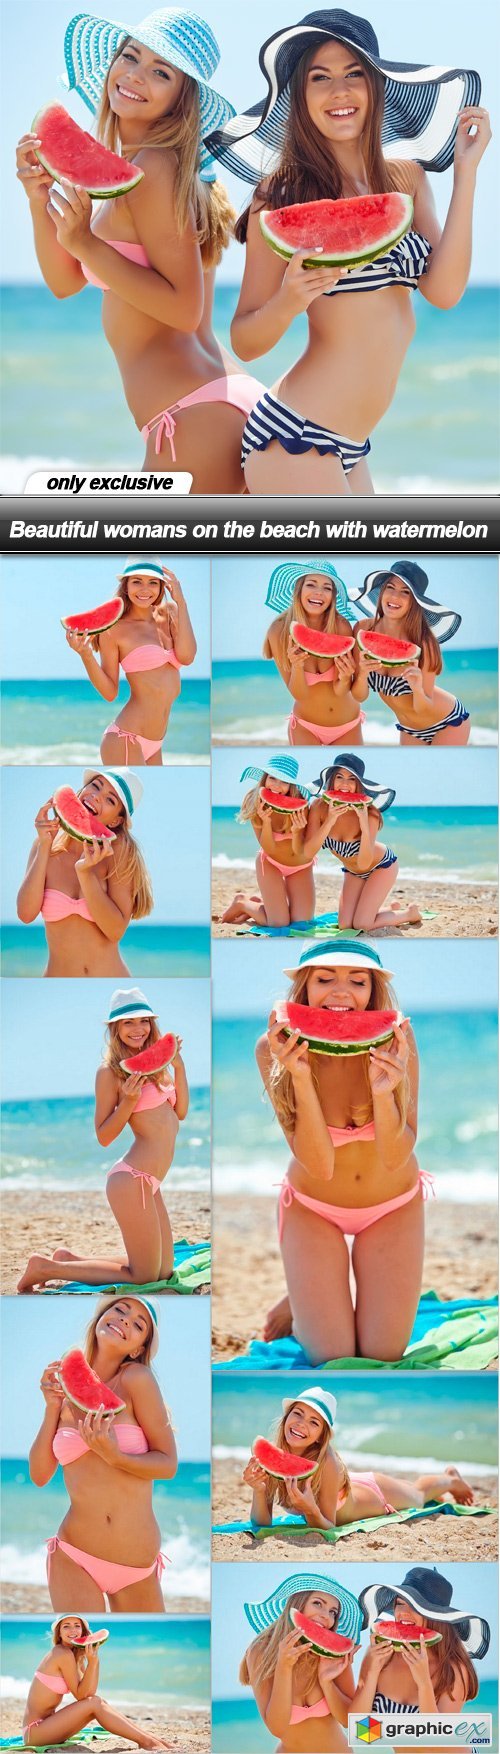 Beautiful womans on the beach with watermelon - 11 UHQ JPEG